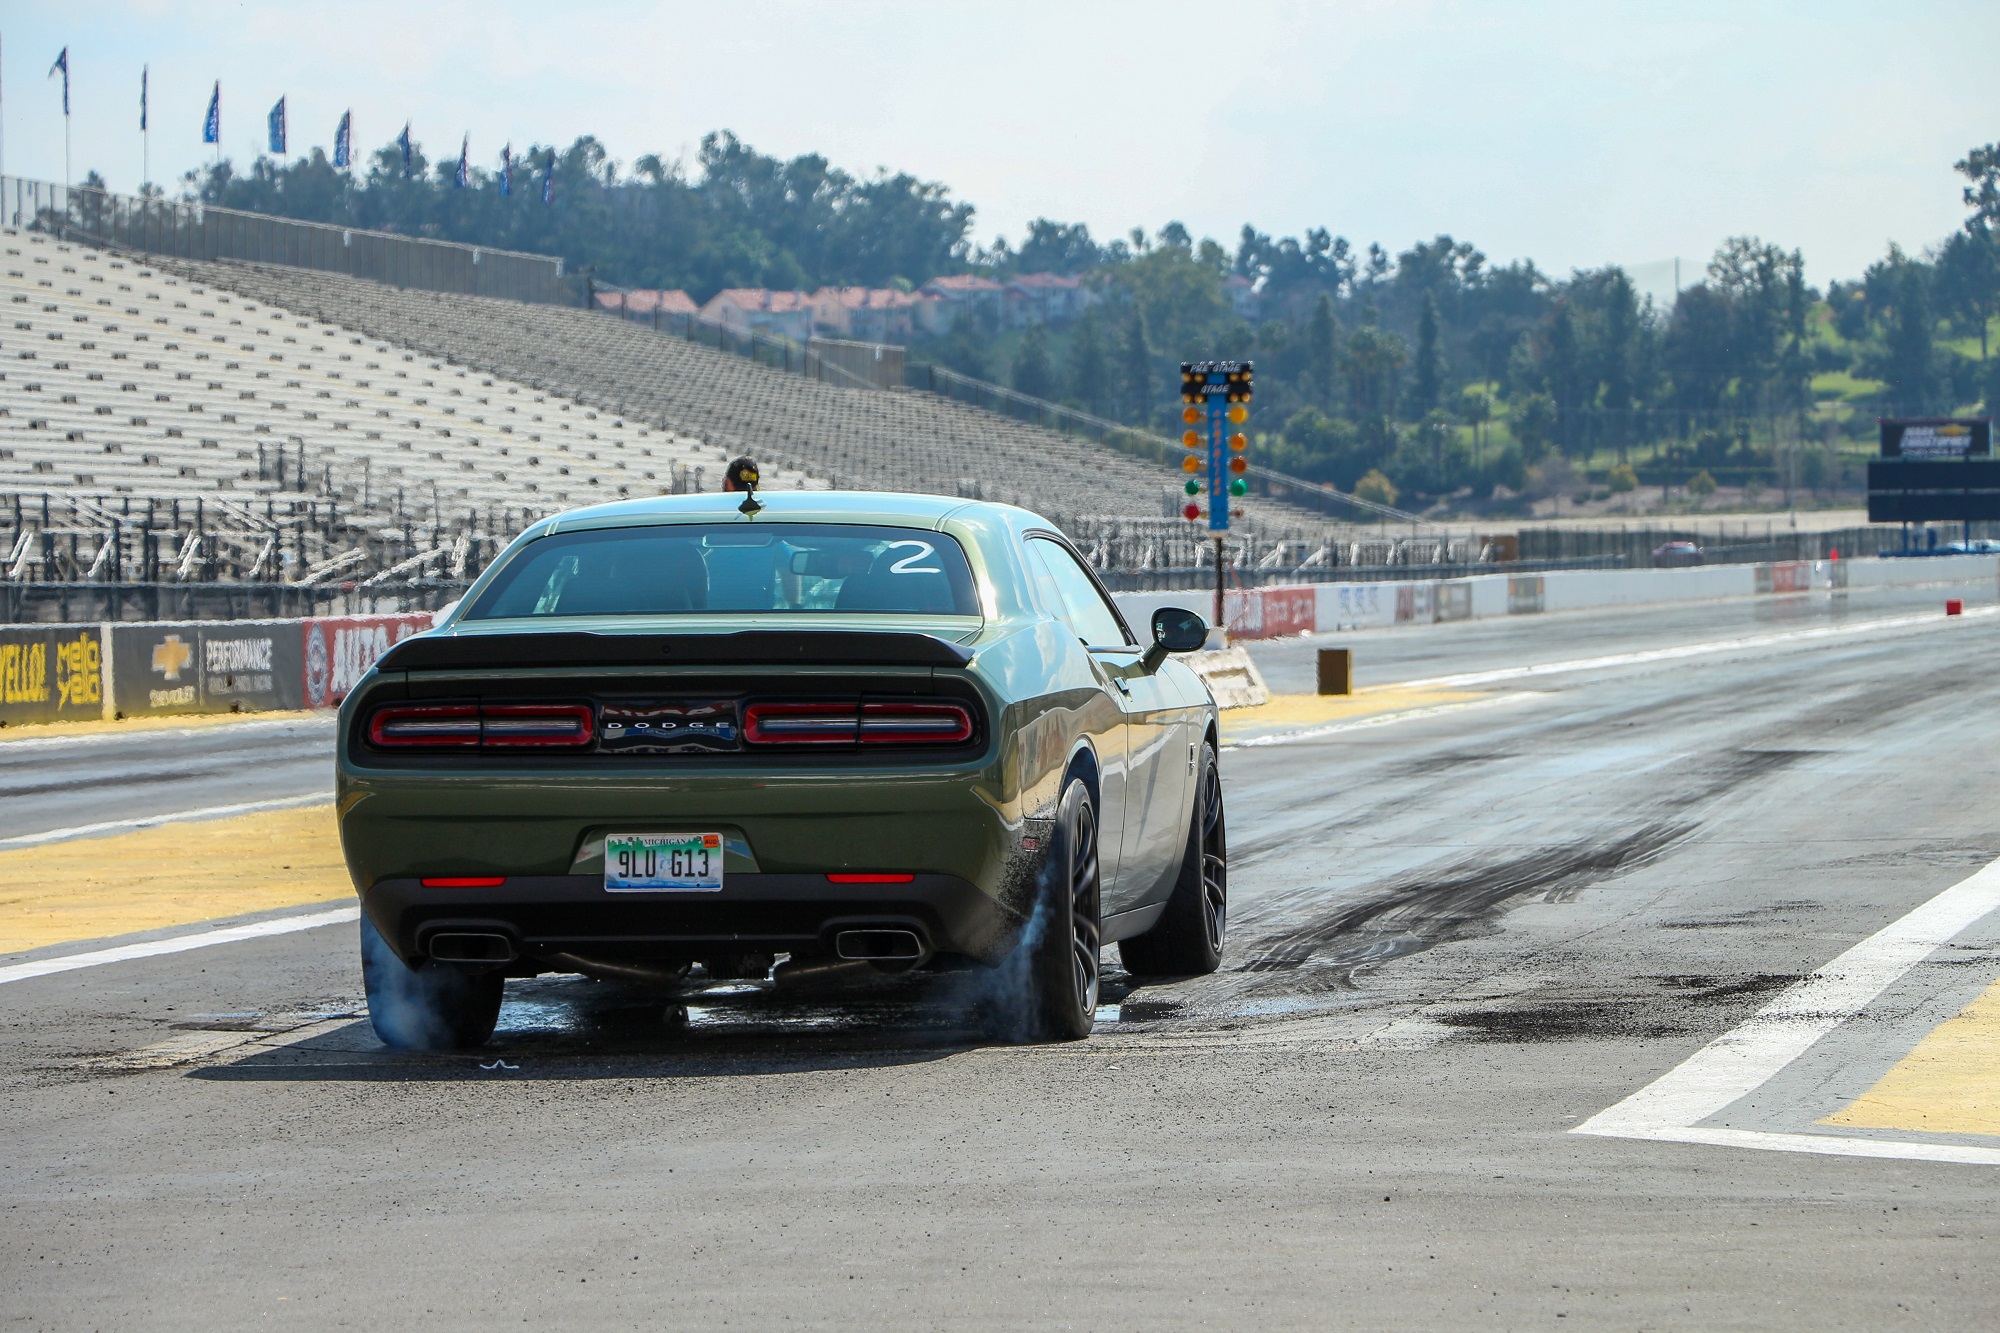 Jake Stumph 2019 Dodge Challenger RT Scat Pack 1320 Drag Strip Test First Drive Review